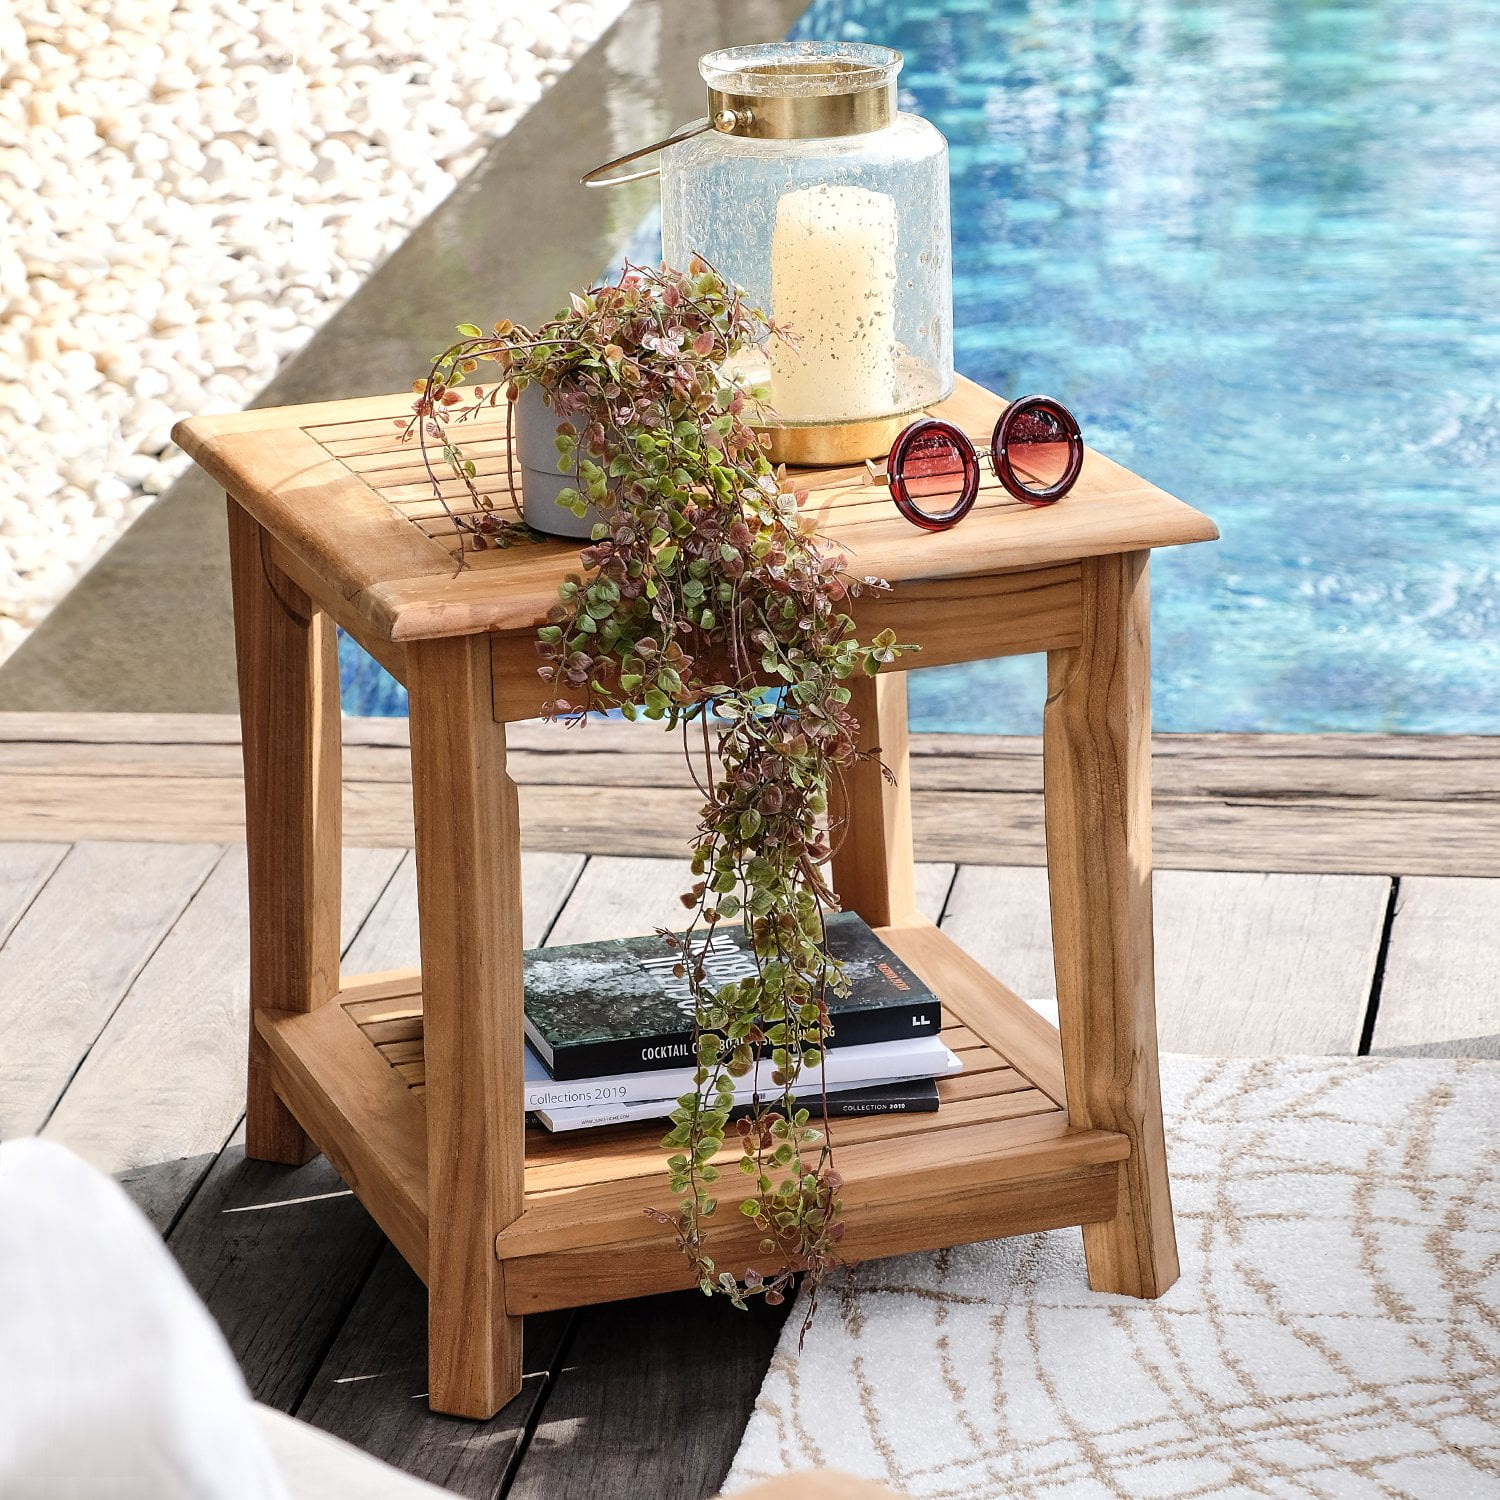 21" TEAK WOOD SIDE SQUARE TABLE END STOOL BATH SHOWER SPA OUTDOOR INDOOR PATIO 